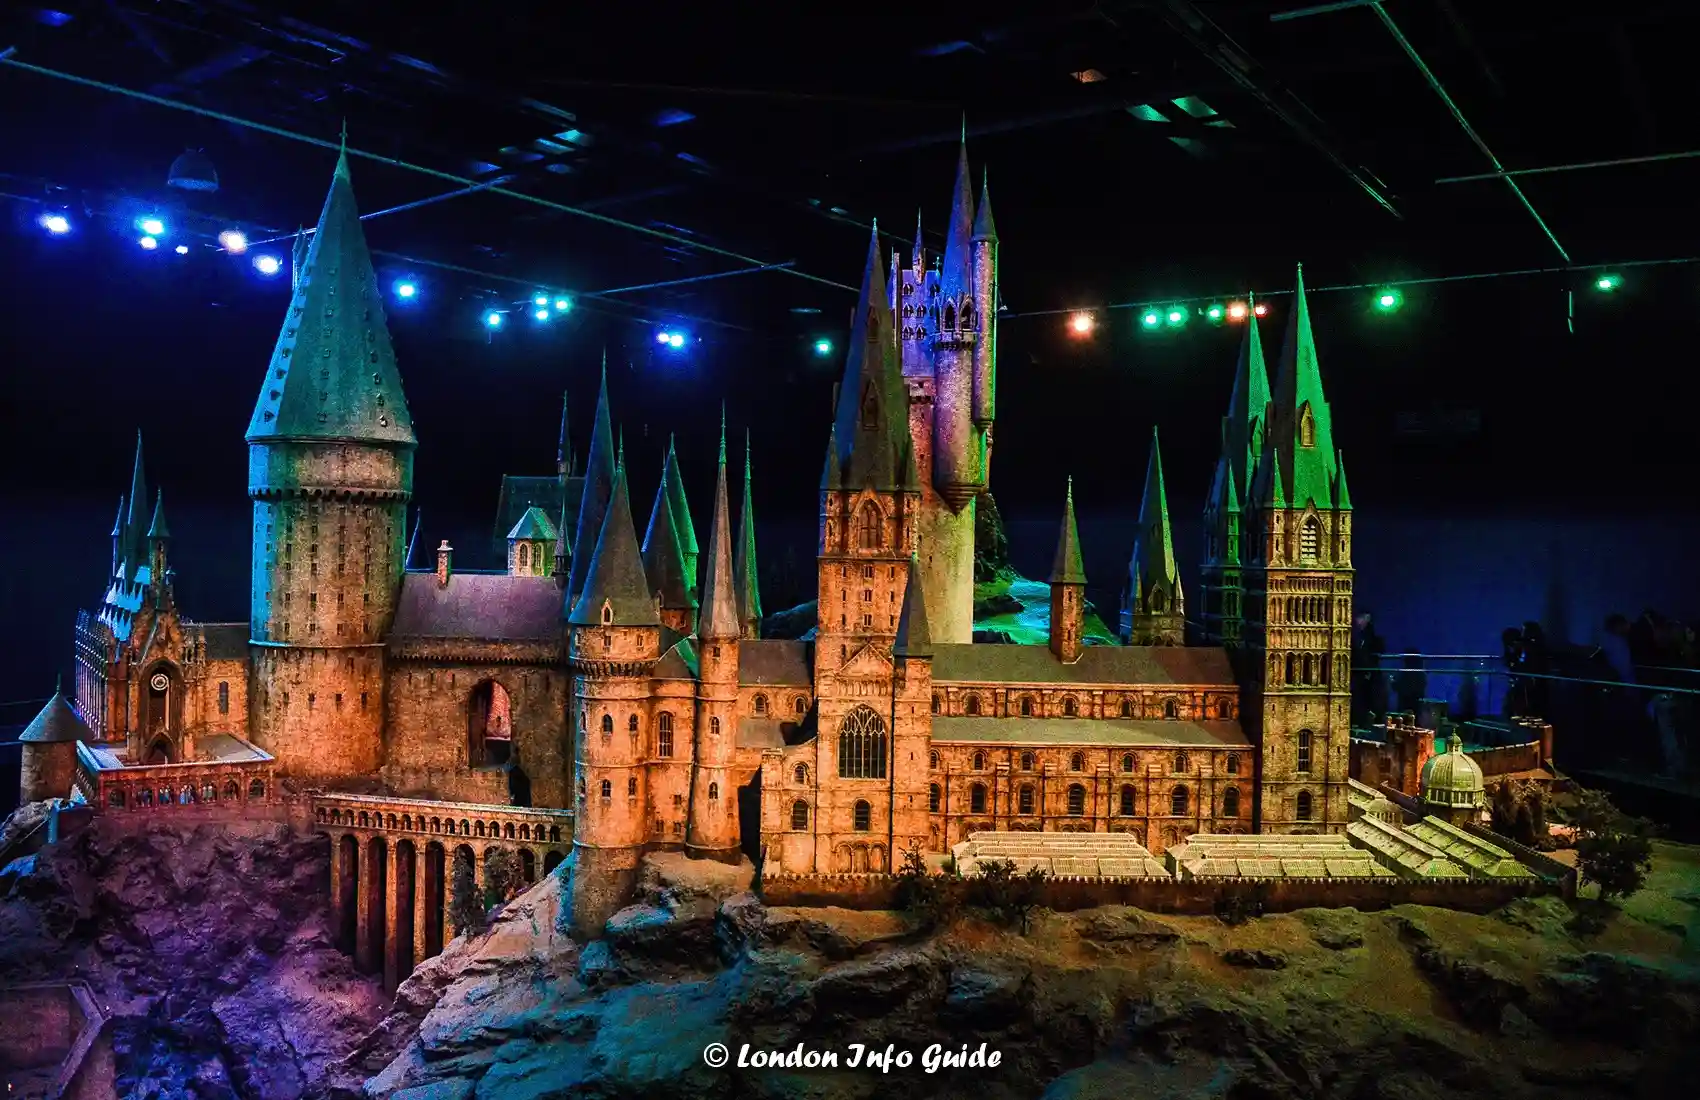 Experience the wizarding world with these Harry Potter tours in London. Embark on an adventure and uncover what J.K Rowling created.